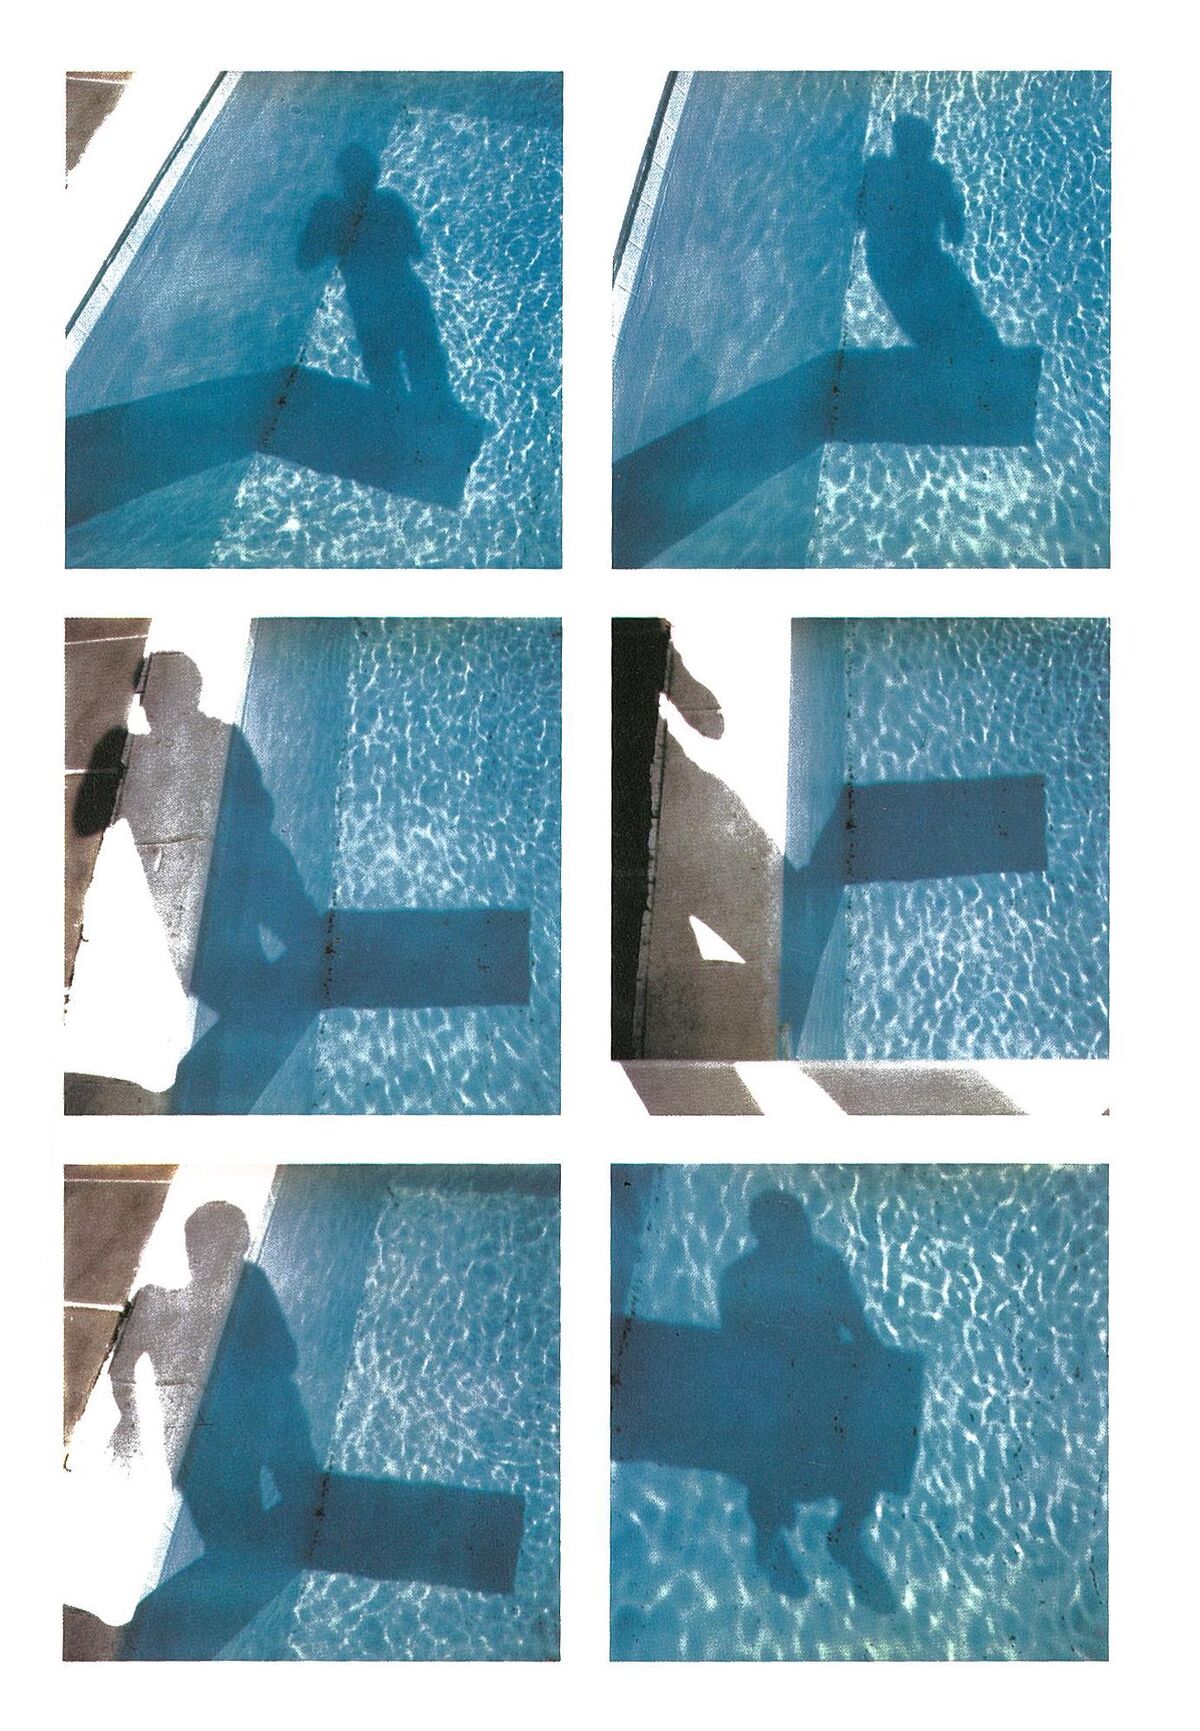 David Hockney Polaroid photographs depicting shadows in a pool from the special edition Paper Pools book, which accompanies the print